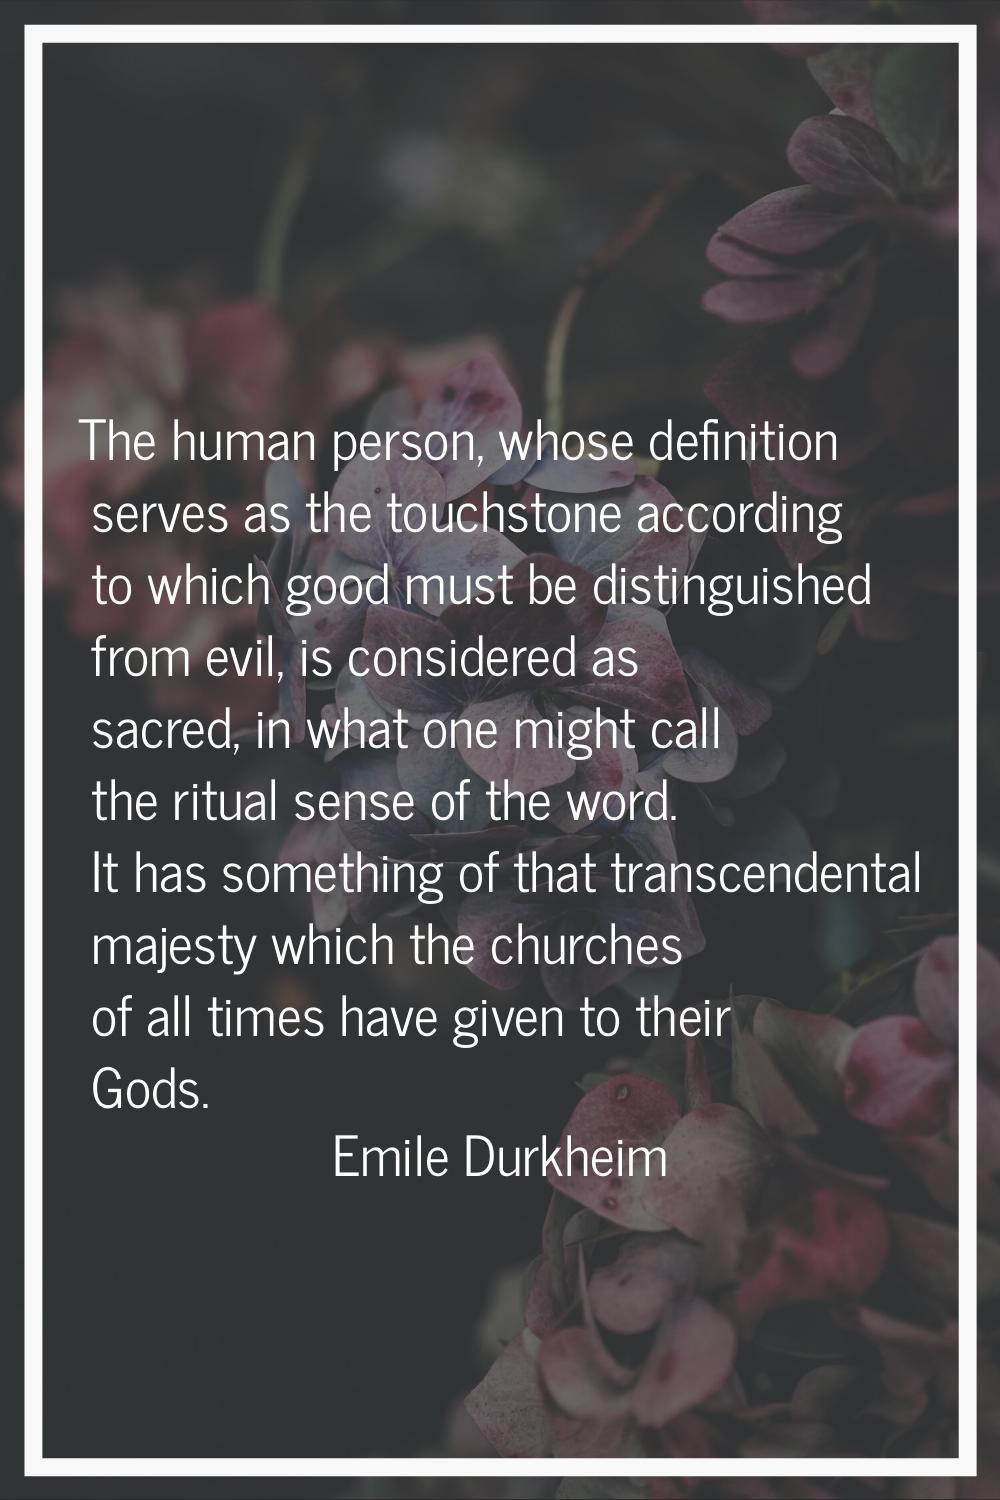 The human person, whose definition serves as the touchstone according to which good must be disting